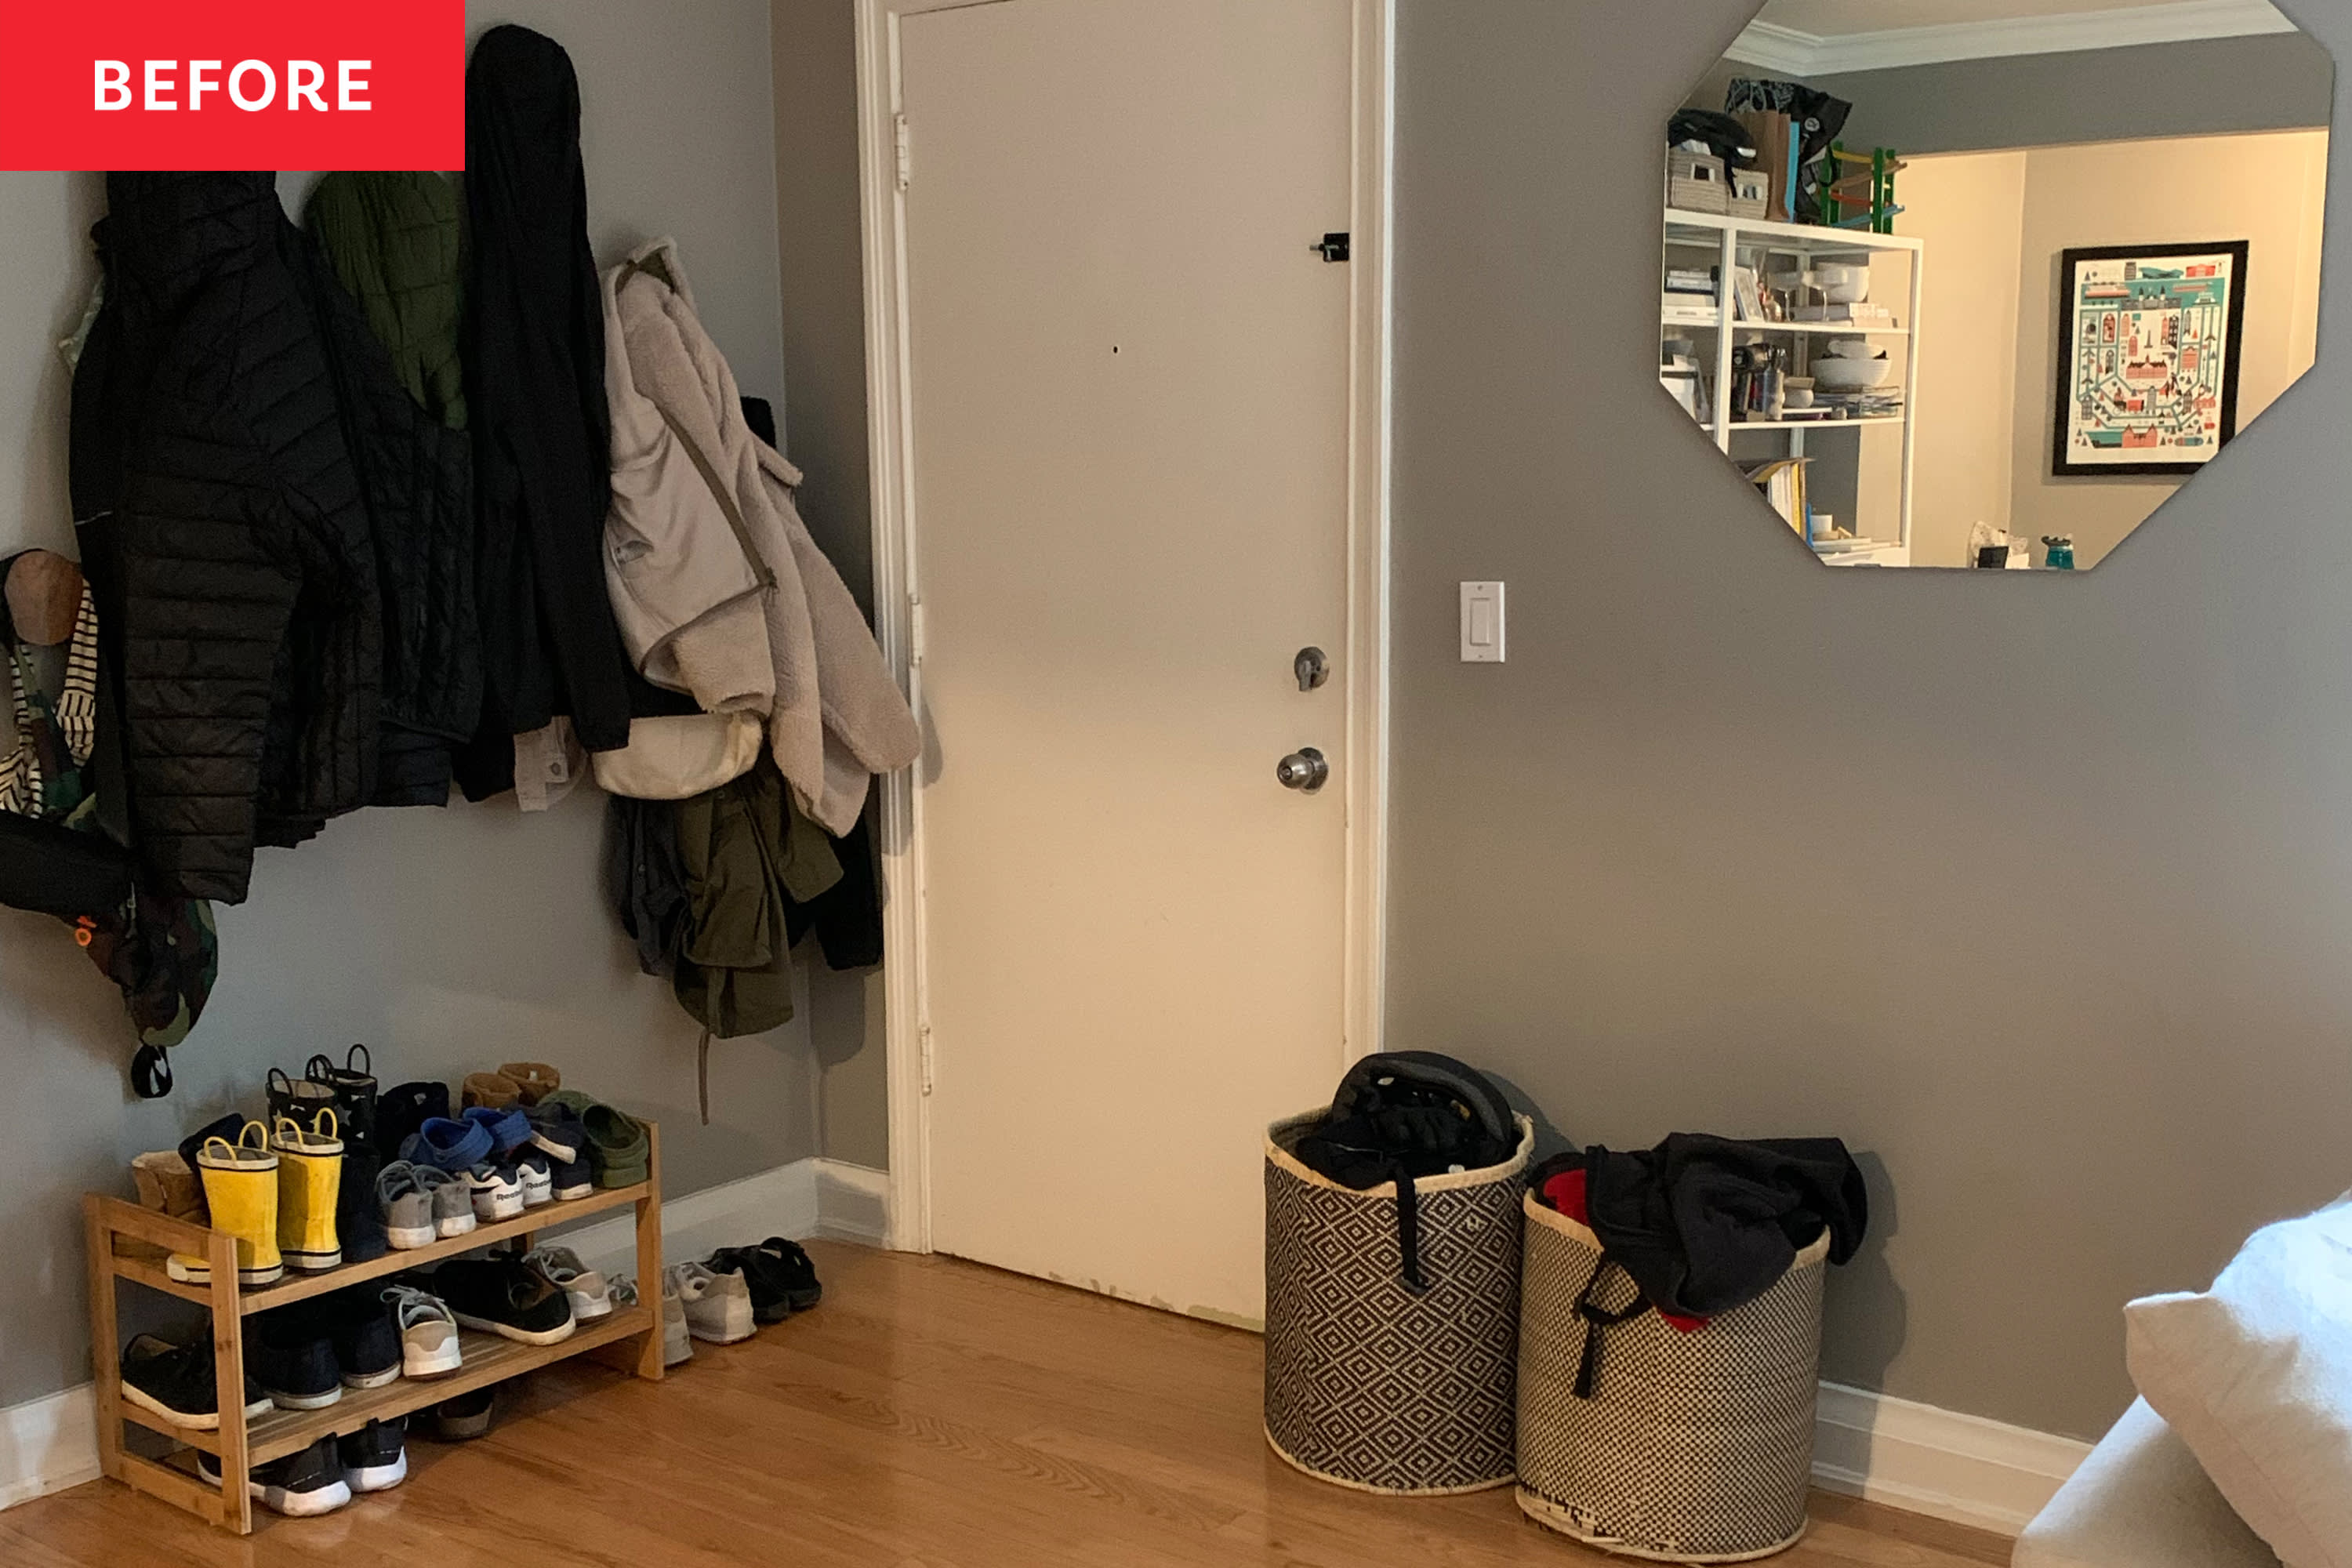 https://cdn.apartmenttherapy.info/image/upload/v1680897862/at/home-projects/2023-04/alexandra-g-entryway/alexandra-g-entryway-before-horizontal-tagged-113874935.jpg